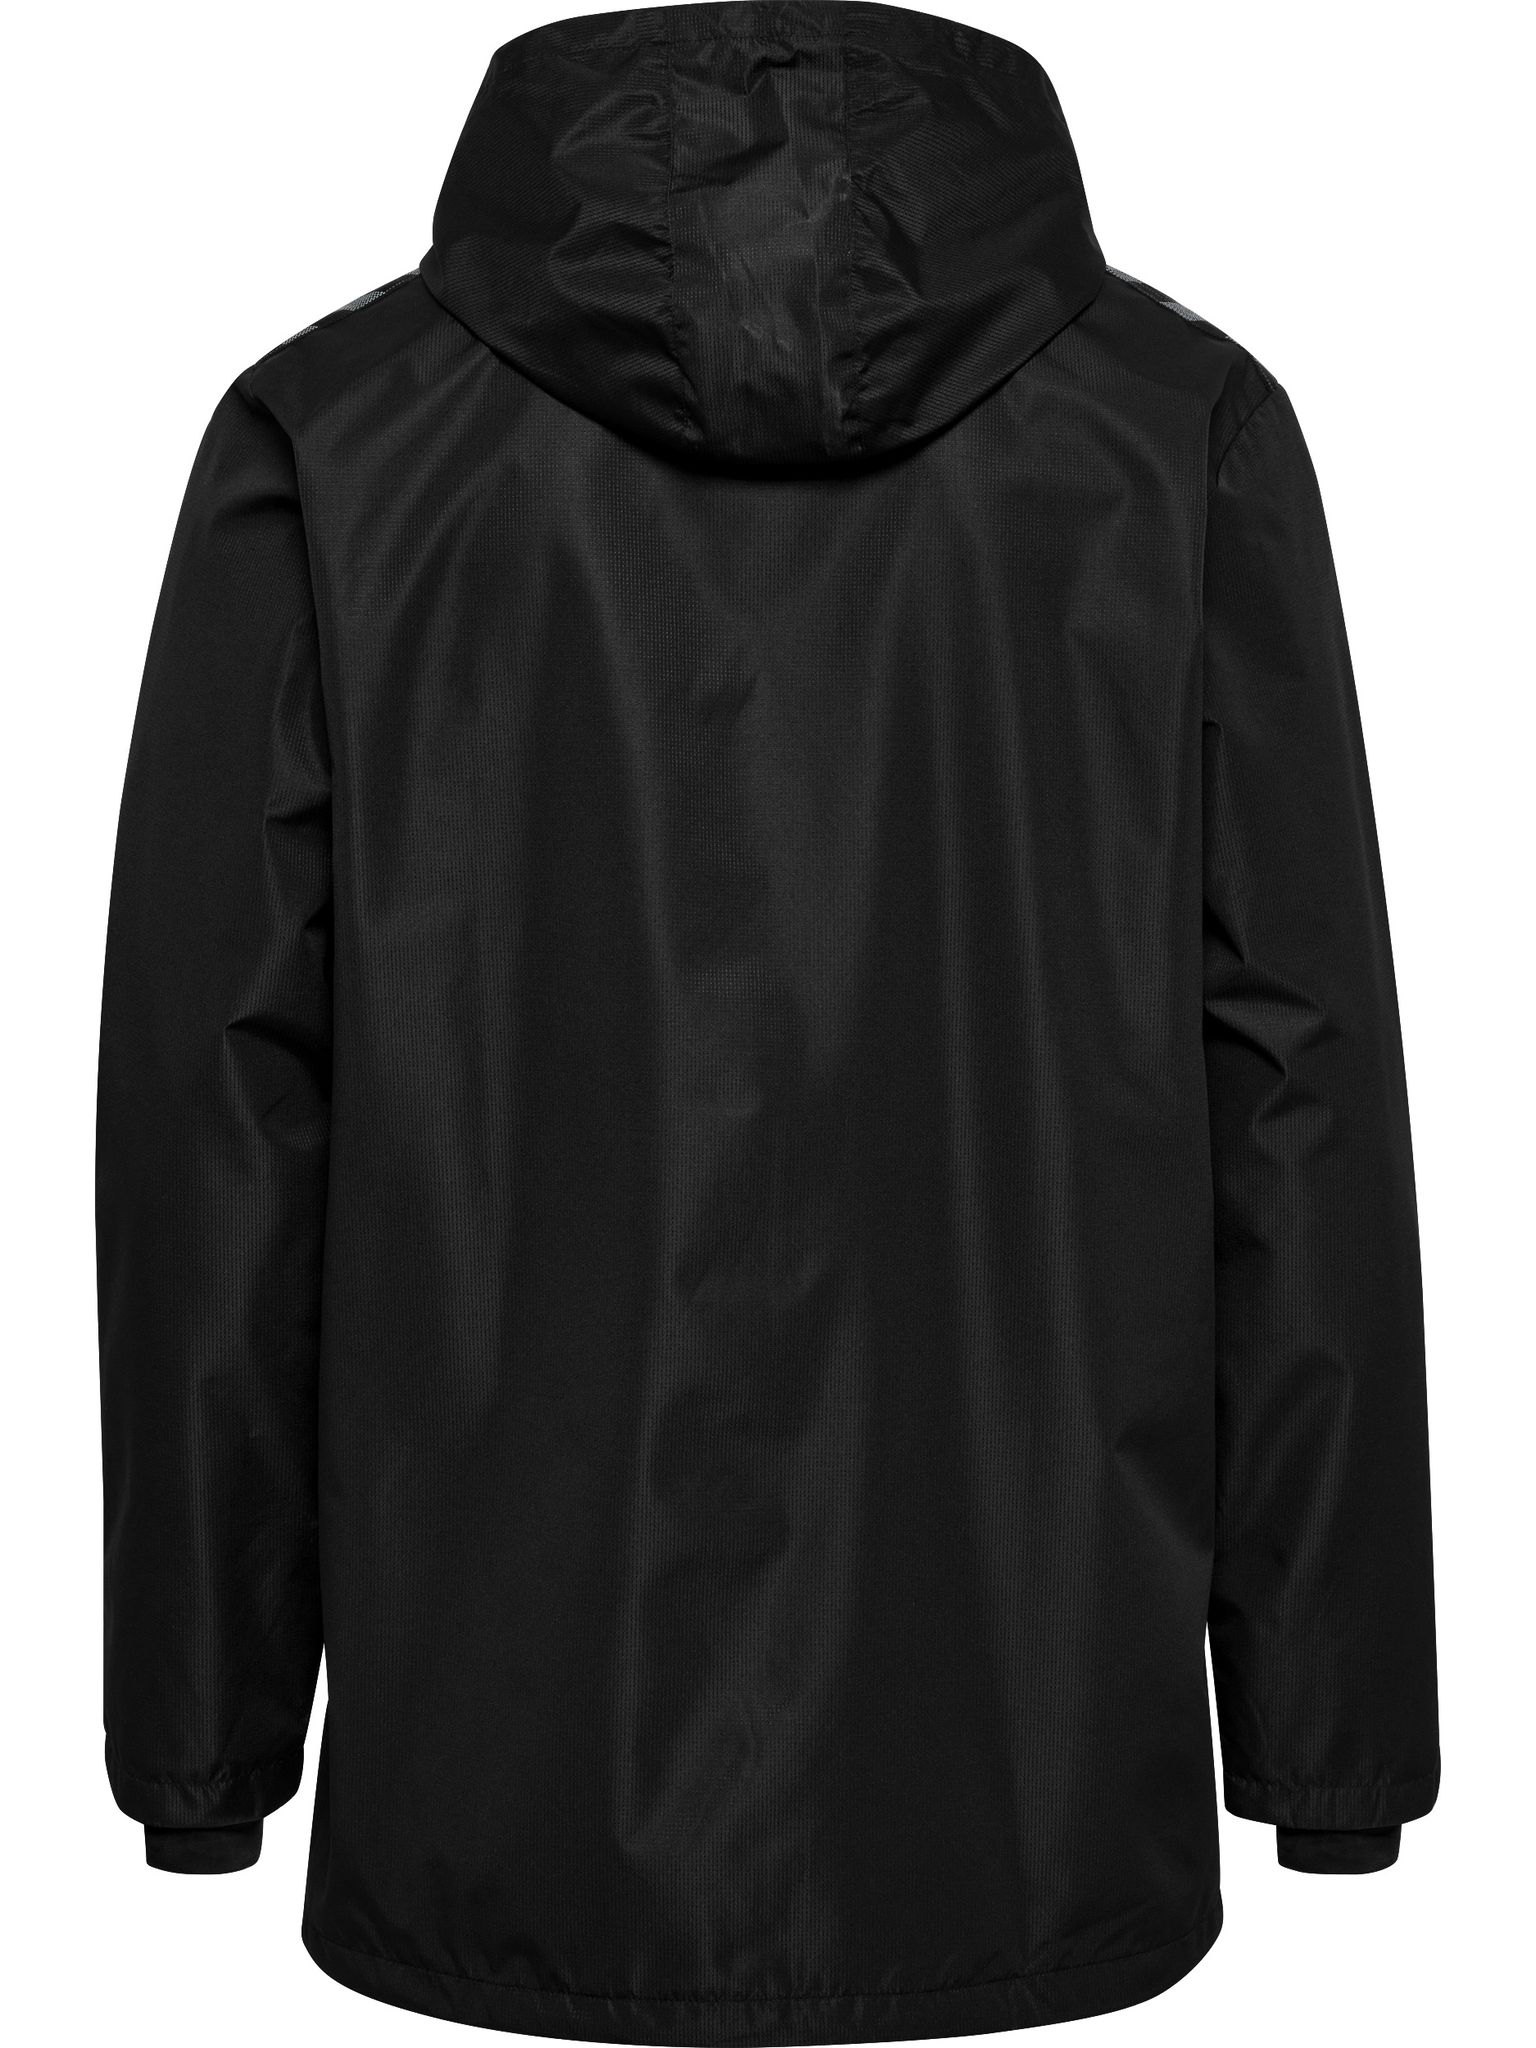 hmlAUTHENTIC ALL WEATHER JACKET